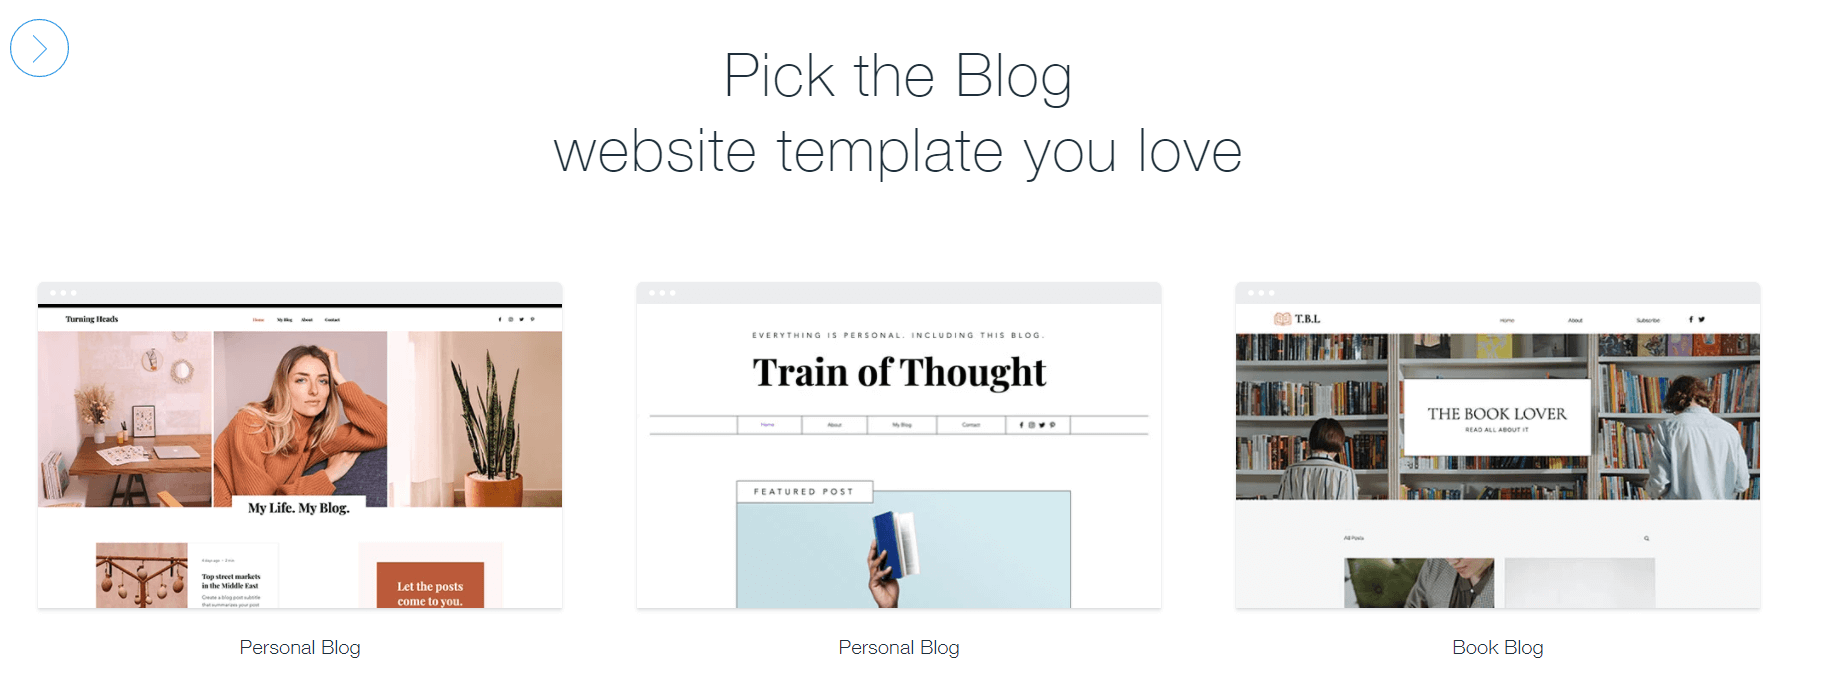 Wix has a range of free templates for anyone looking to learn how to create a website free of cost.